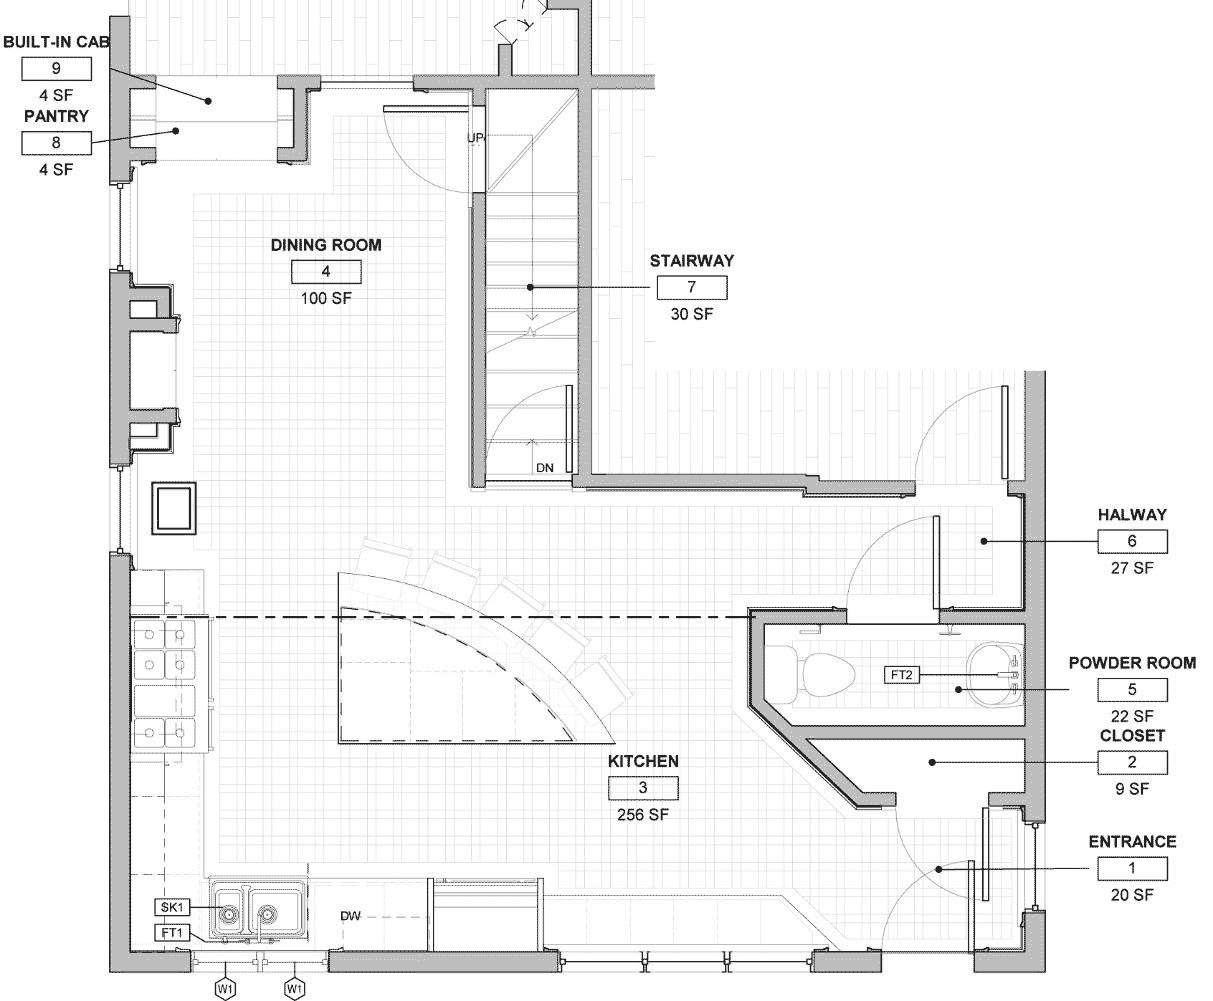 new floor plan for Victorian kitchen remodel by remodeler Silent Rivers Design+Build of Des Moines, Iowa